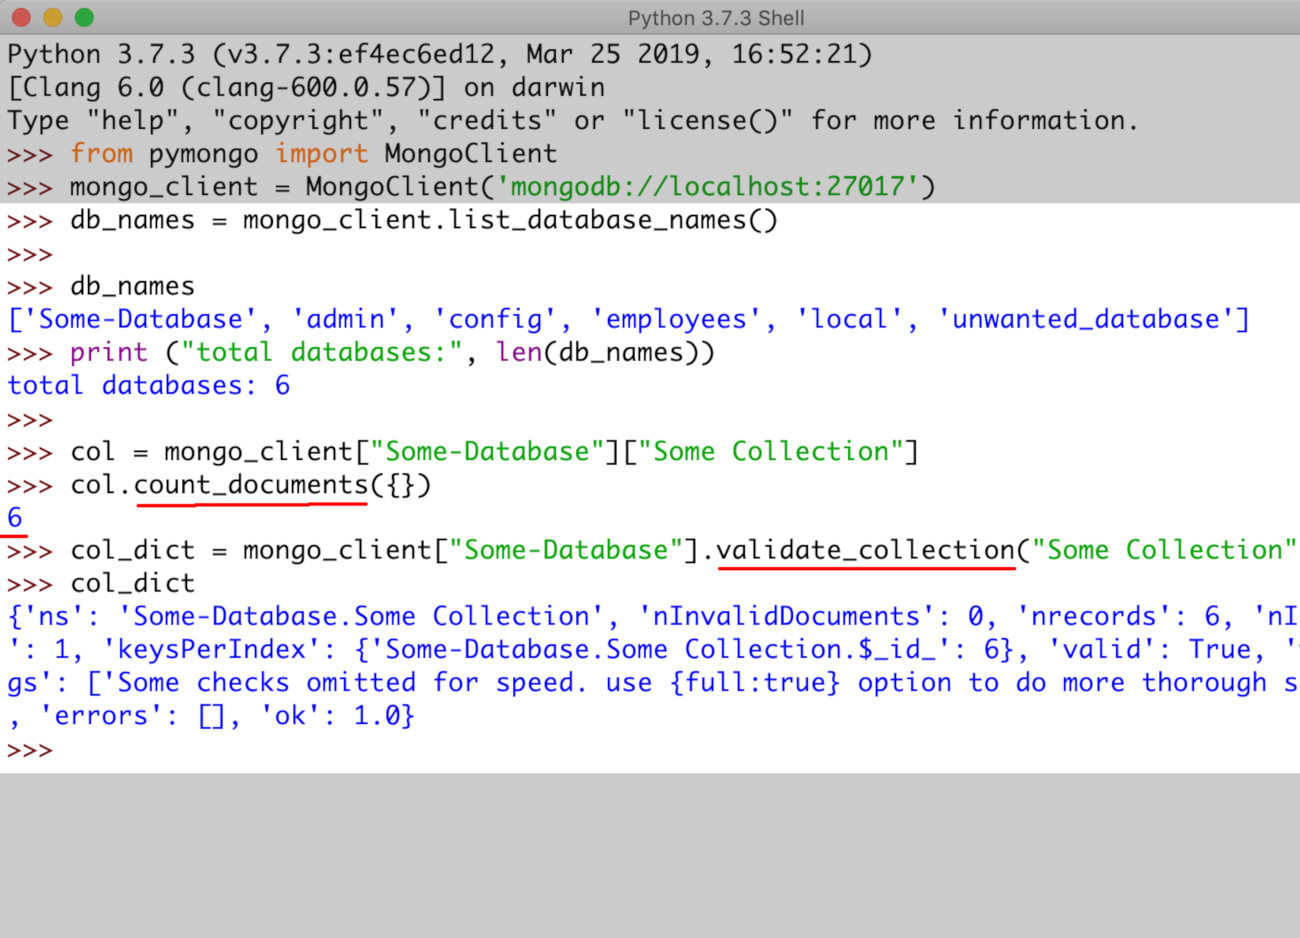 Screenshot of IDLE counting documents and using validate_collection() on a MongoDB collection